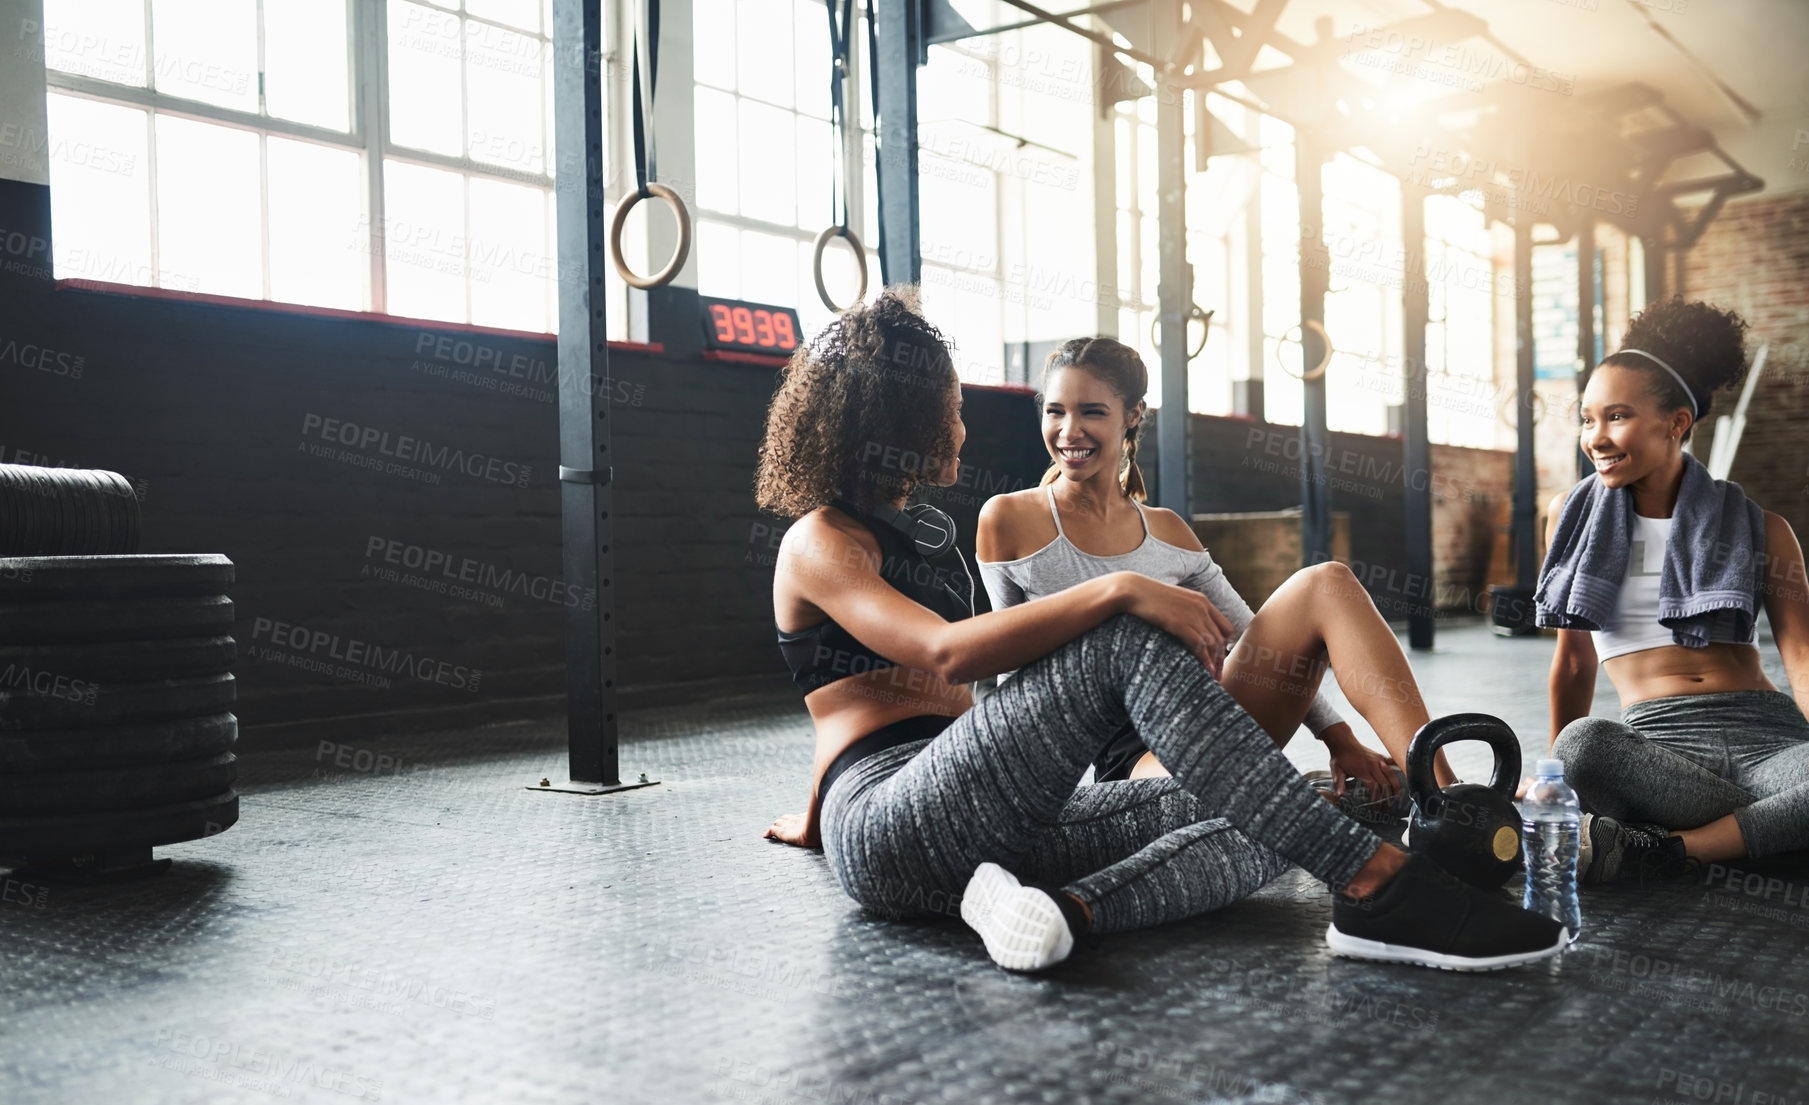 Buy stock photo Shot of a group of happy young women taking a break together at the gym